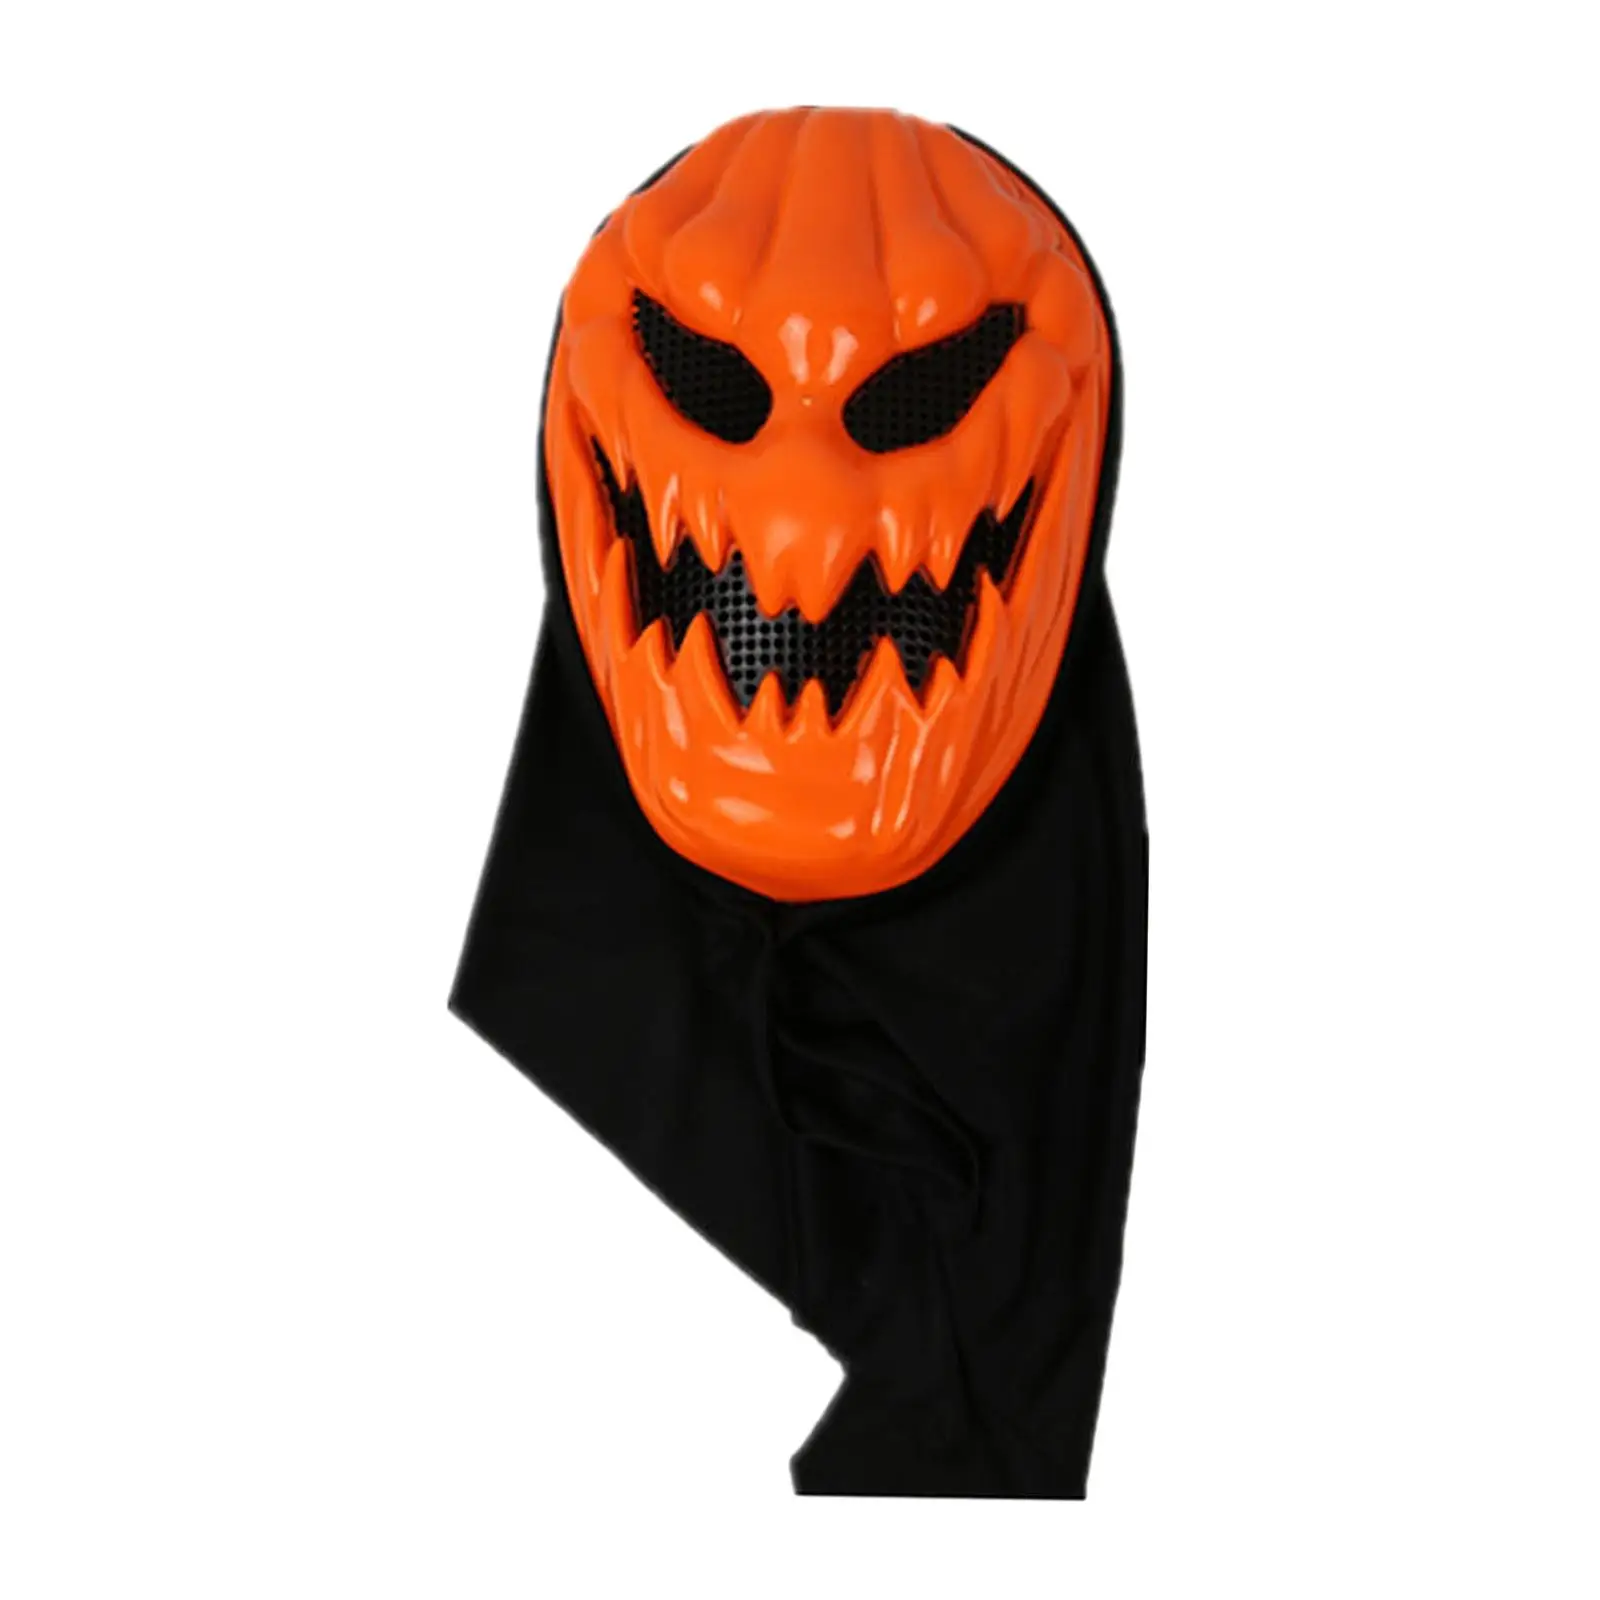 Halloween Pumpkin Head Mask Props Full Face Cover Headgear Costume Party Accessories for Show Cosplay Party Masquerade Festival